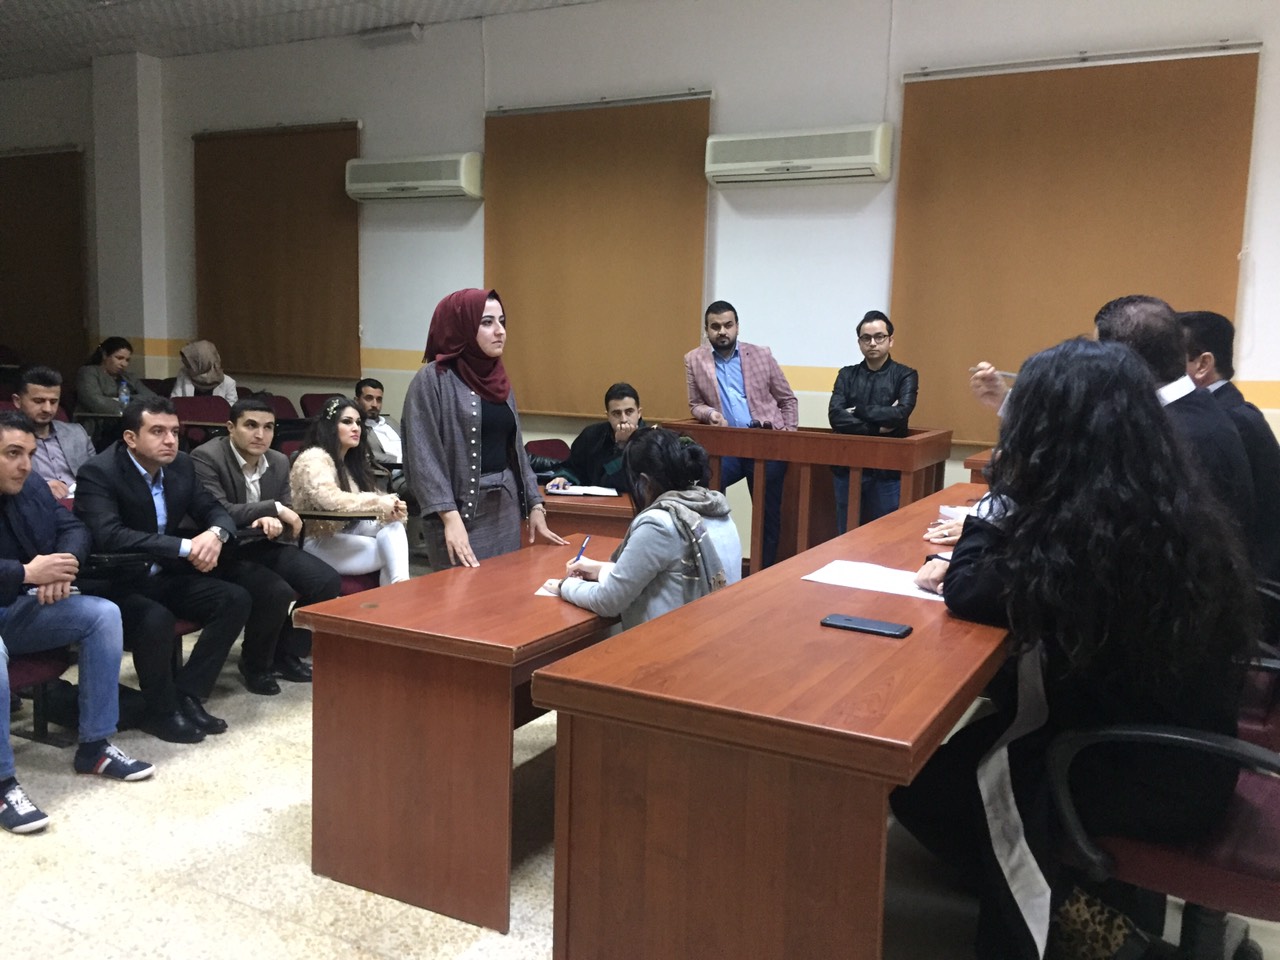 The fourth stage’s Students in the law department perform a virtual court